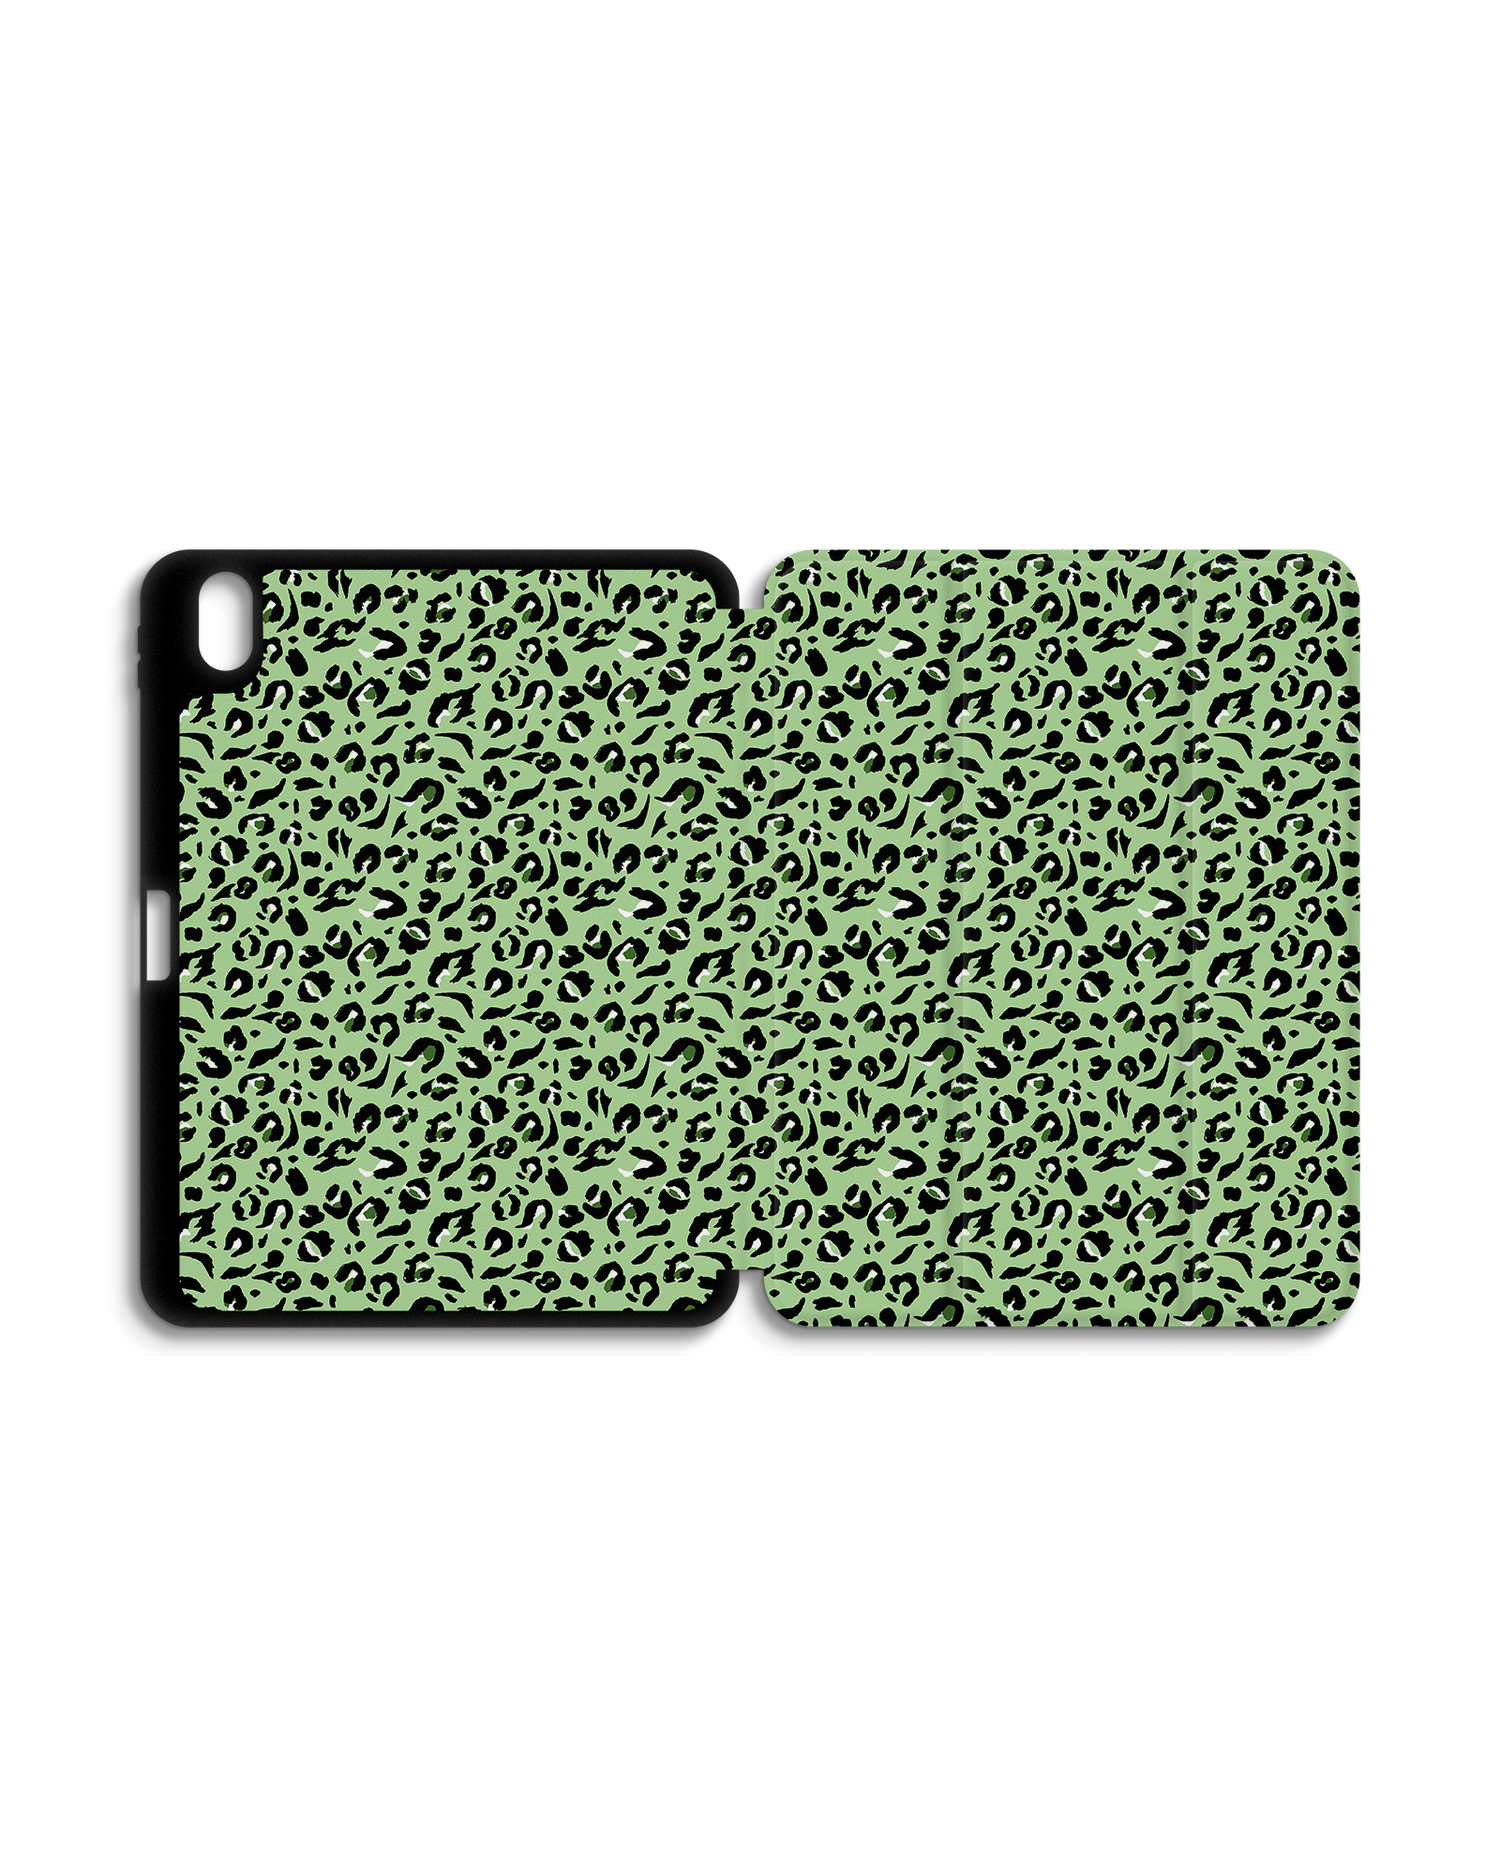 Mint Leopard iPad Case with Pencil Holder for Apple iPad (10th Generation): Opened exterior view